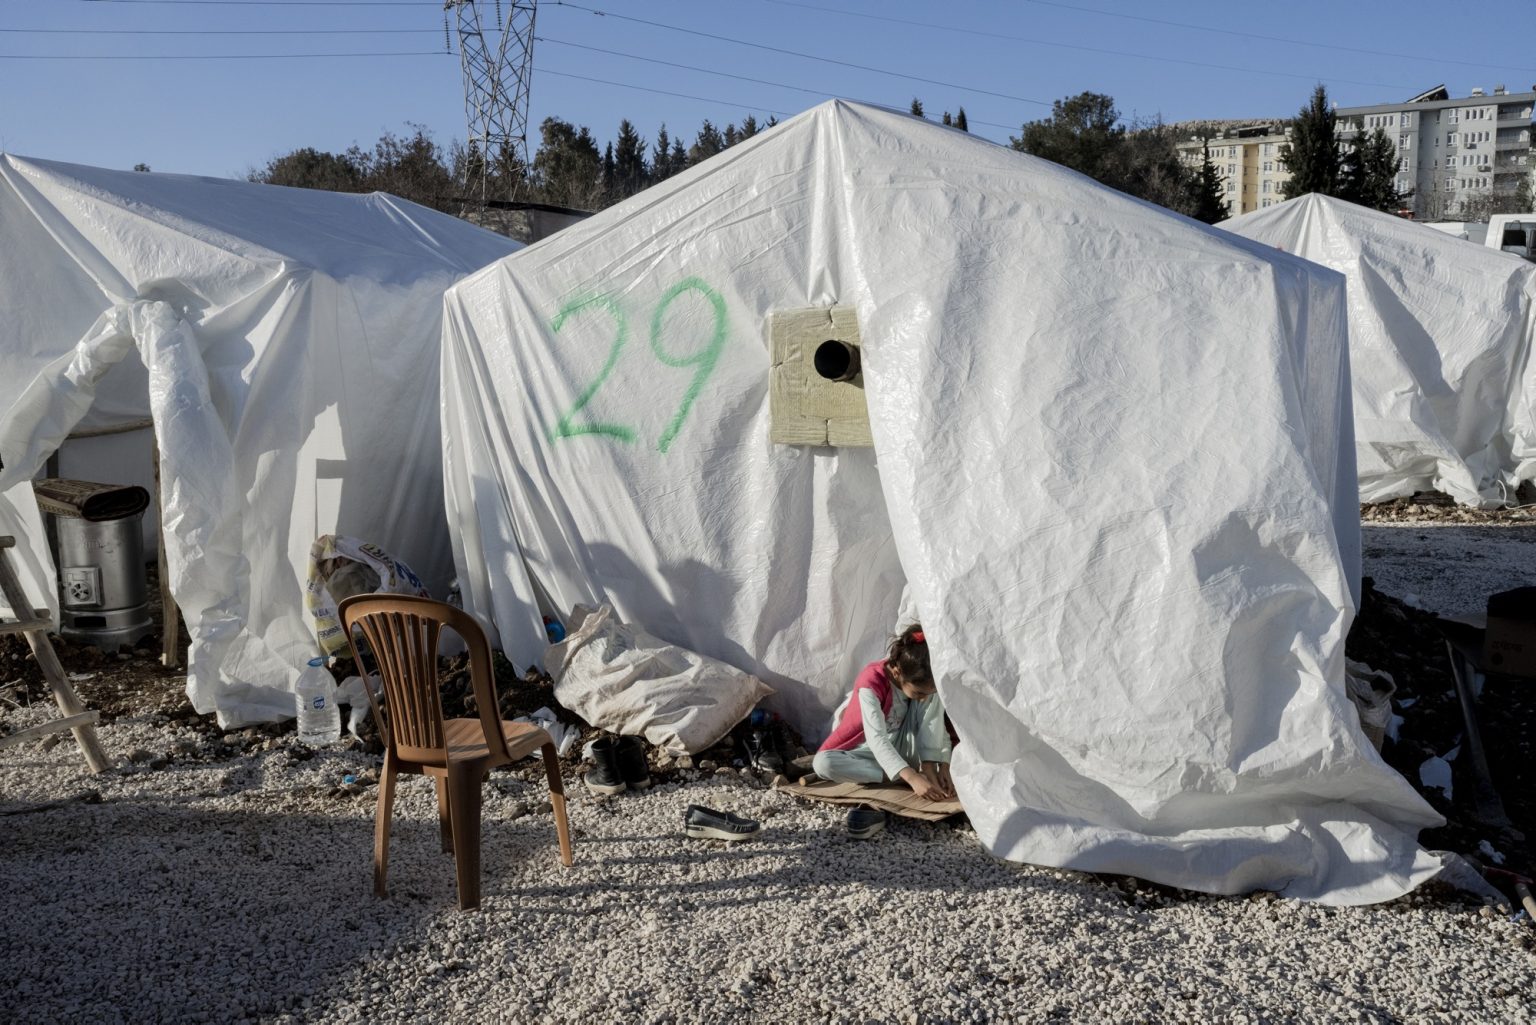 Adiyaman, Turkey, February 2023 - The aftermath of the earthquake that hit southern Turkey and northern Syria.  A tent in an unofficial tent camp not recognized by AFAD, the government's disaster agency, in the city of Adiyaman. ><
Adiyaman, Turchia, febbraio 2023  Le conseguenze del terremoto che ha colpito la Turchia del Sud e la Siria del nord.